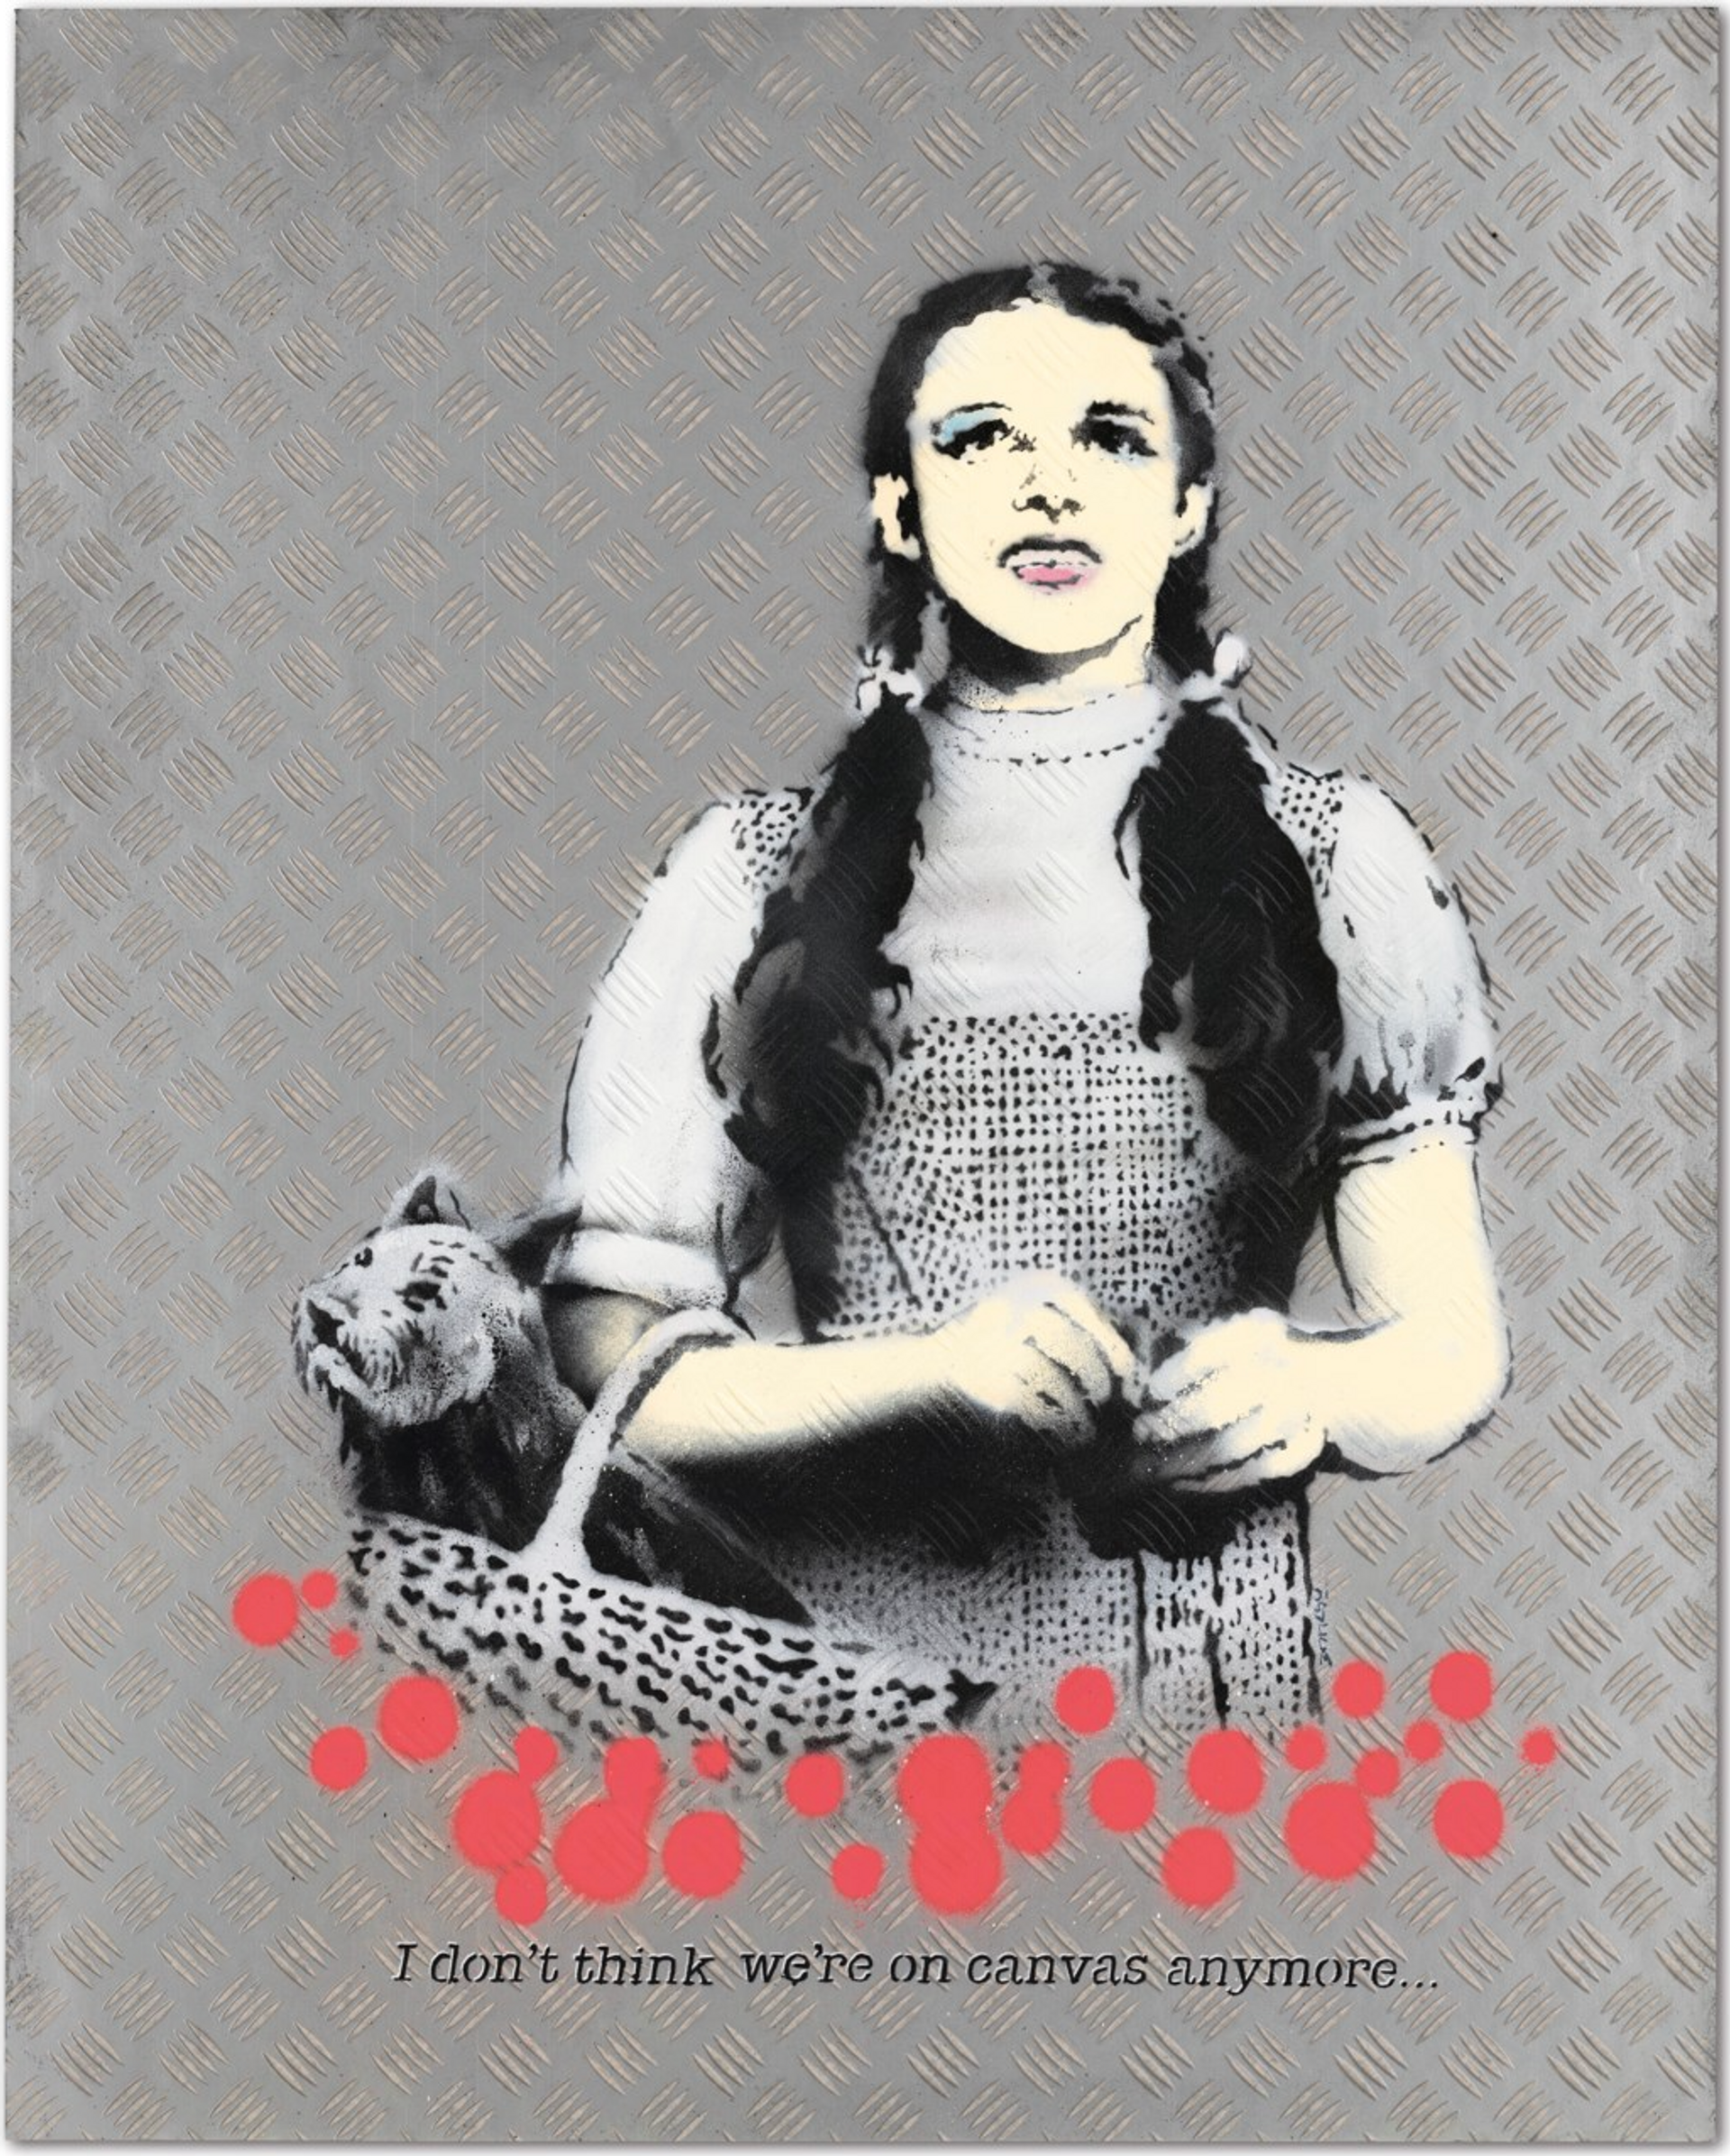 A spray paint on lino flooring laid on board work by Banksy, depicting Dorothy from the Wizard of Oz carrying her dog - Toto - in a basket. Underneath this focal point are sprays of red paint, and the words: “I don't think we're on canvas anymore...”